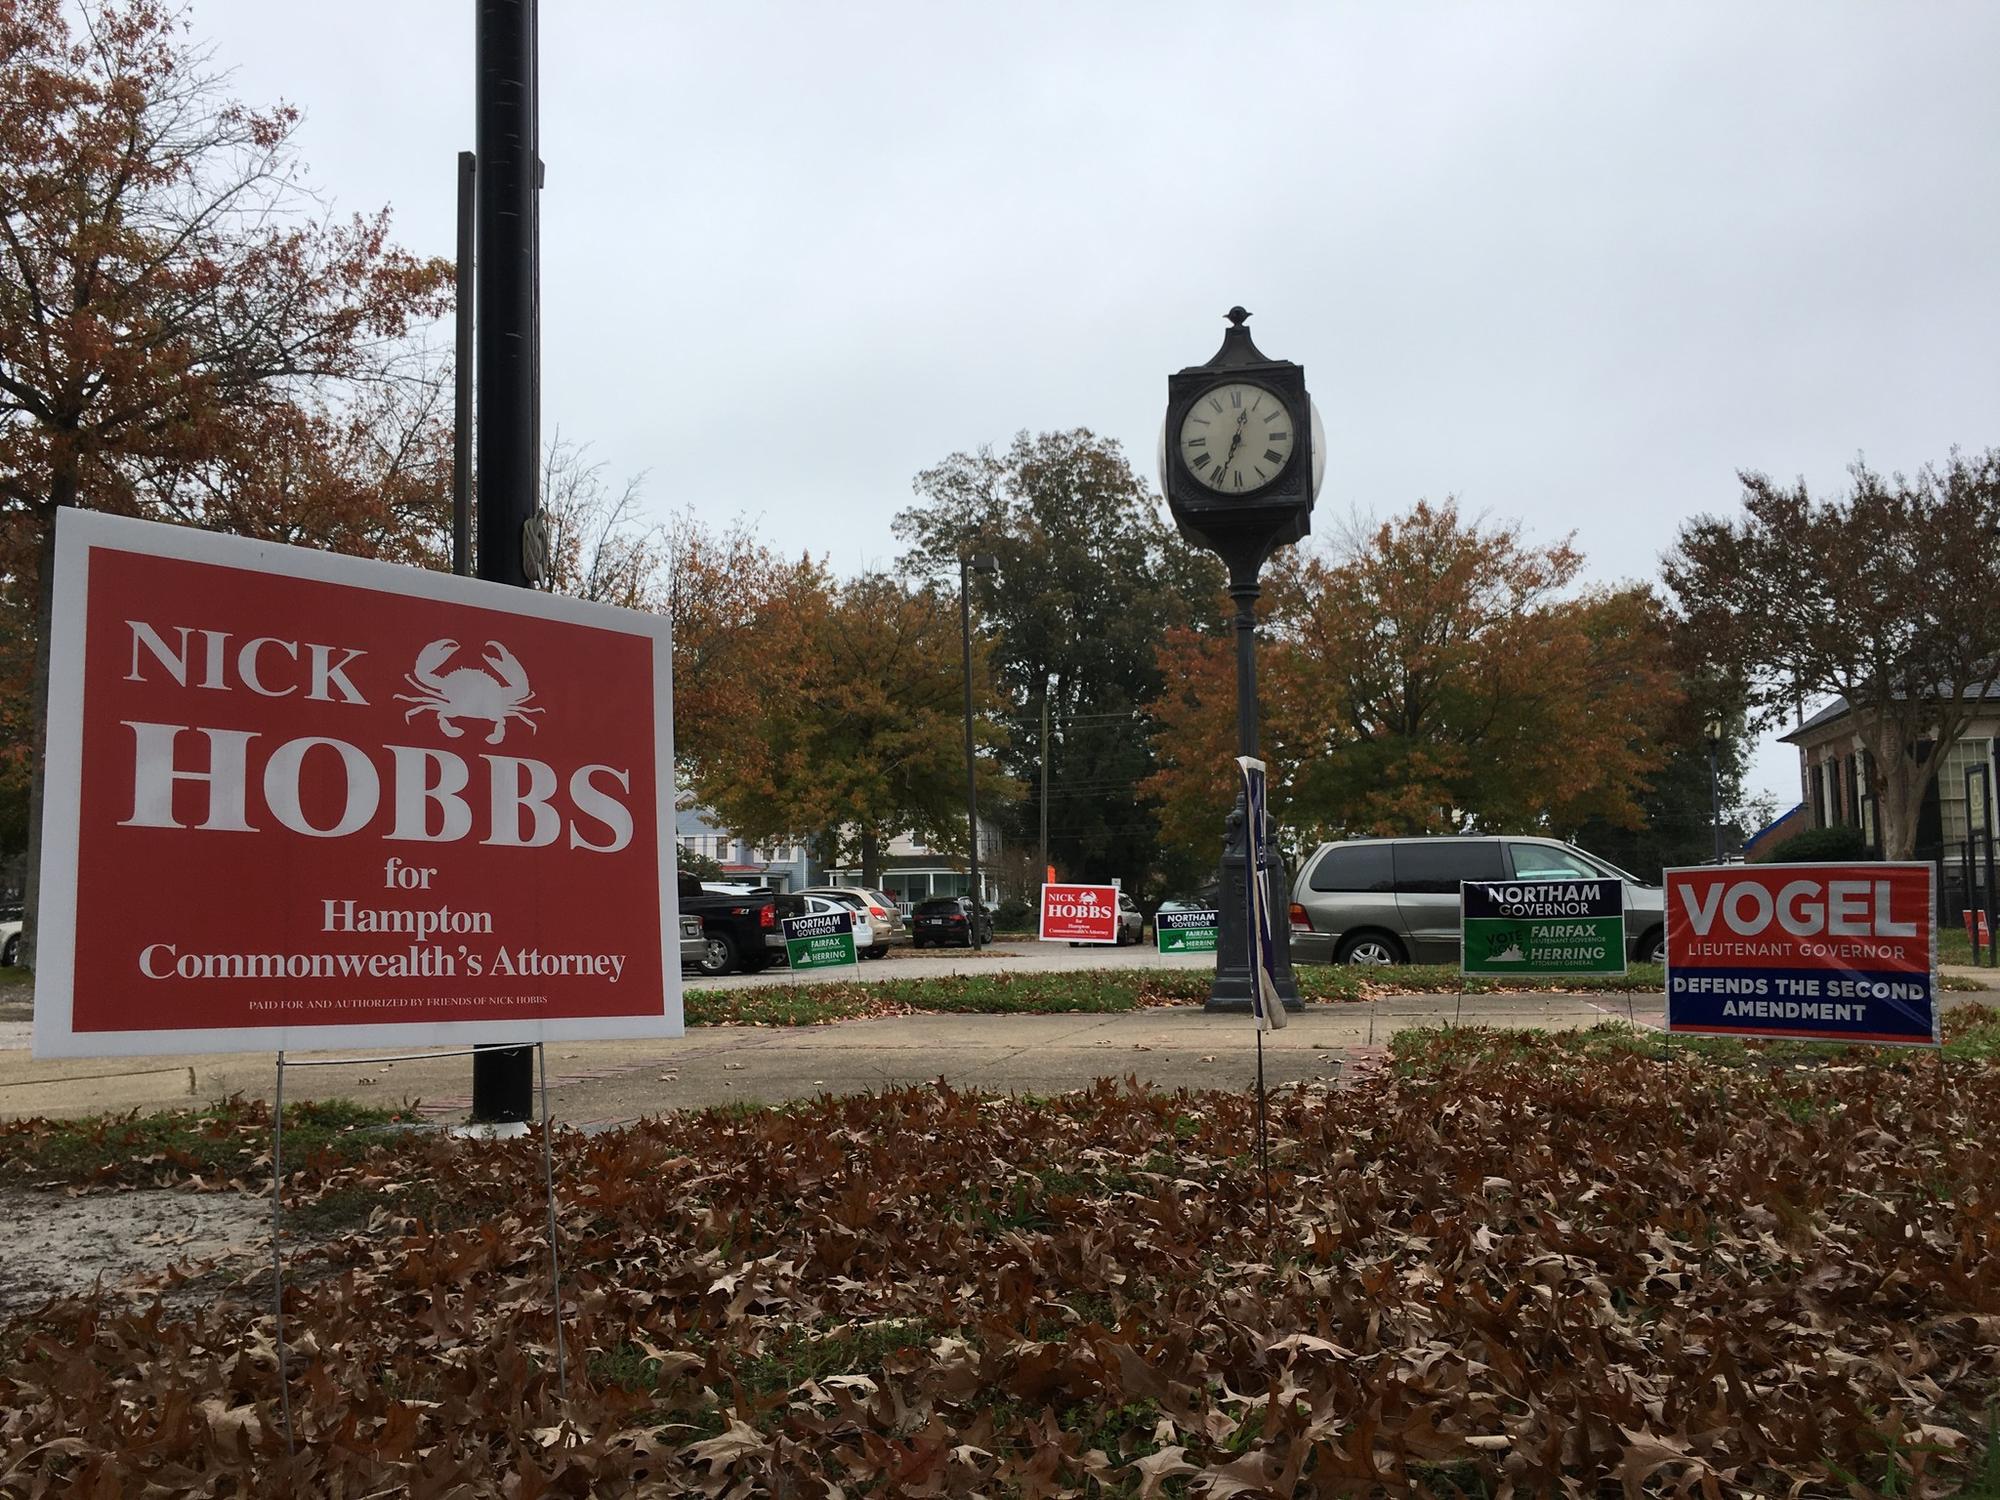 Signs for candidates peppered the parking lot outside the polling place at the Hampton Main Library, where the stream of voters Tuesday morning was busier than usual for a state election.